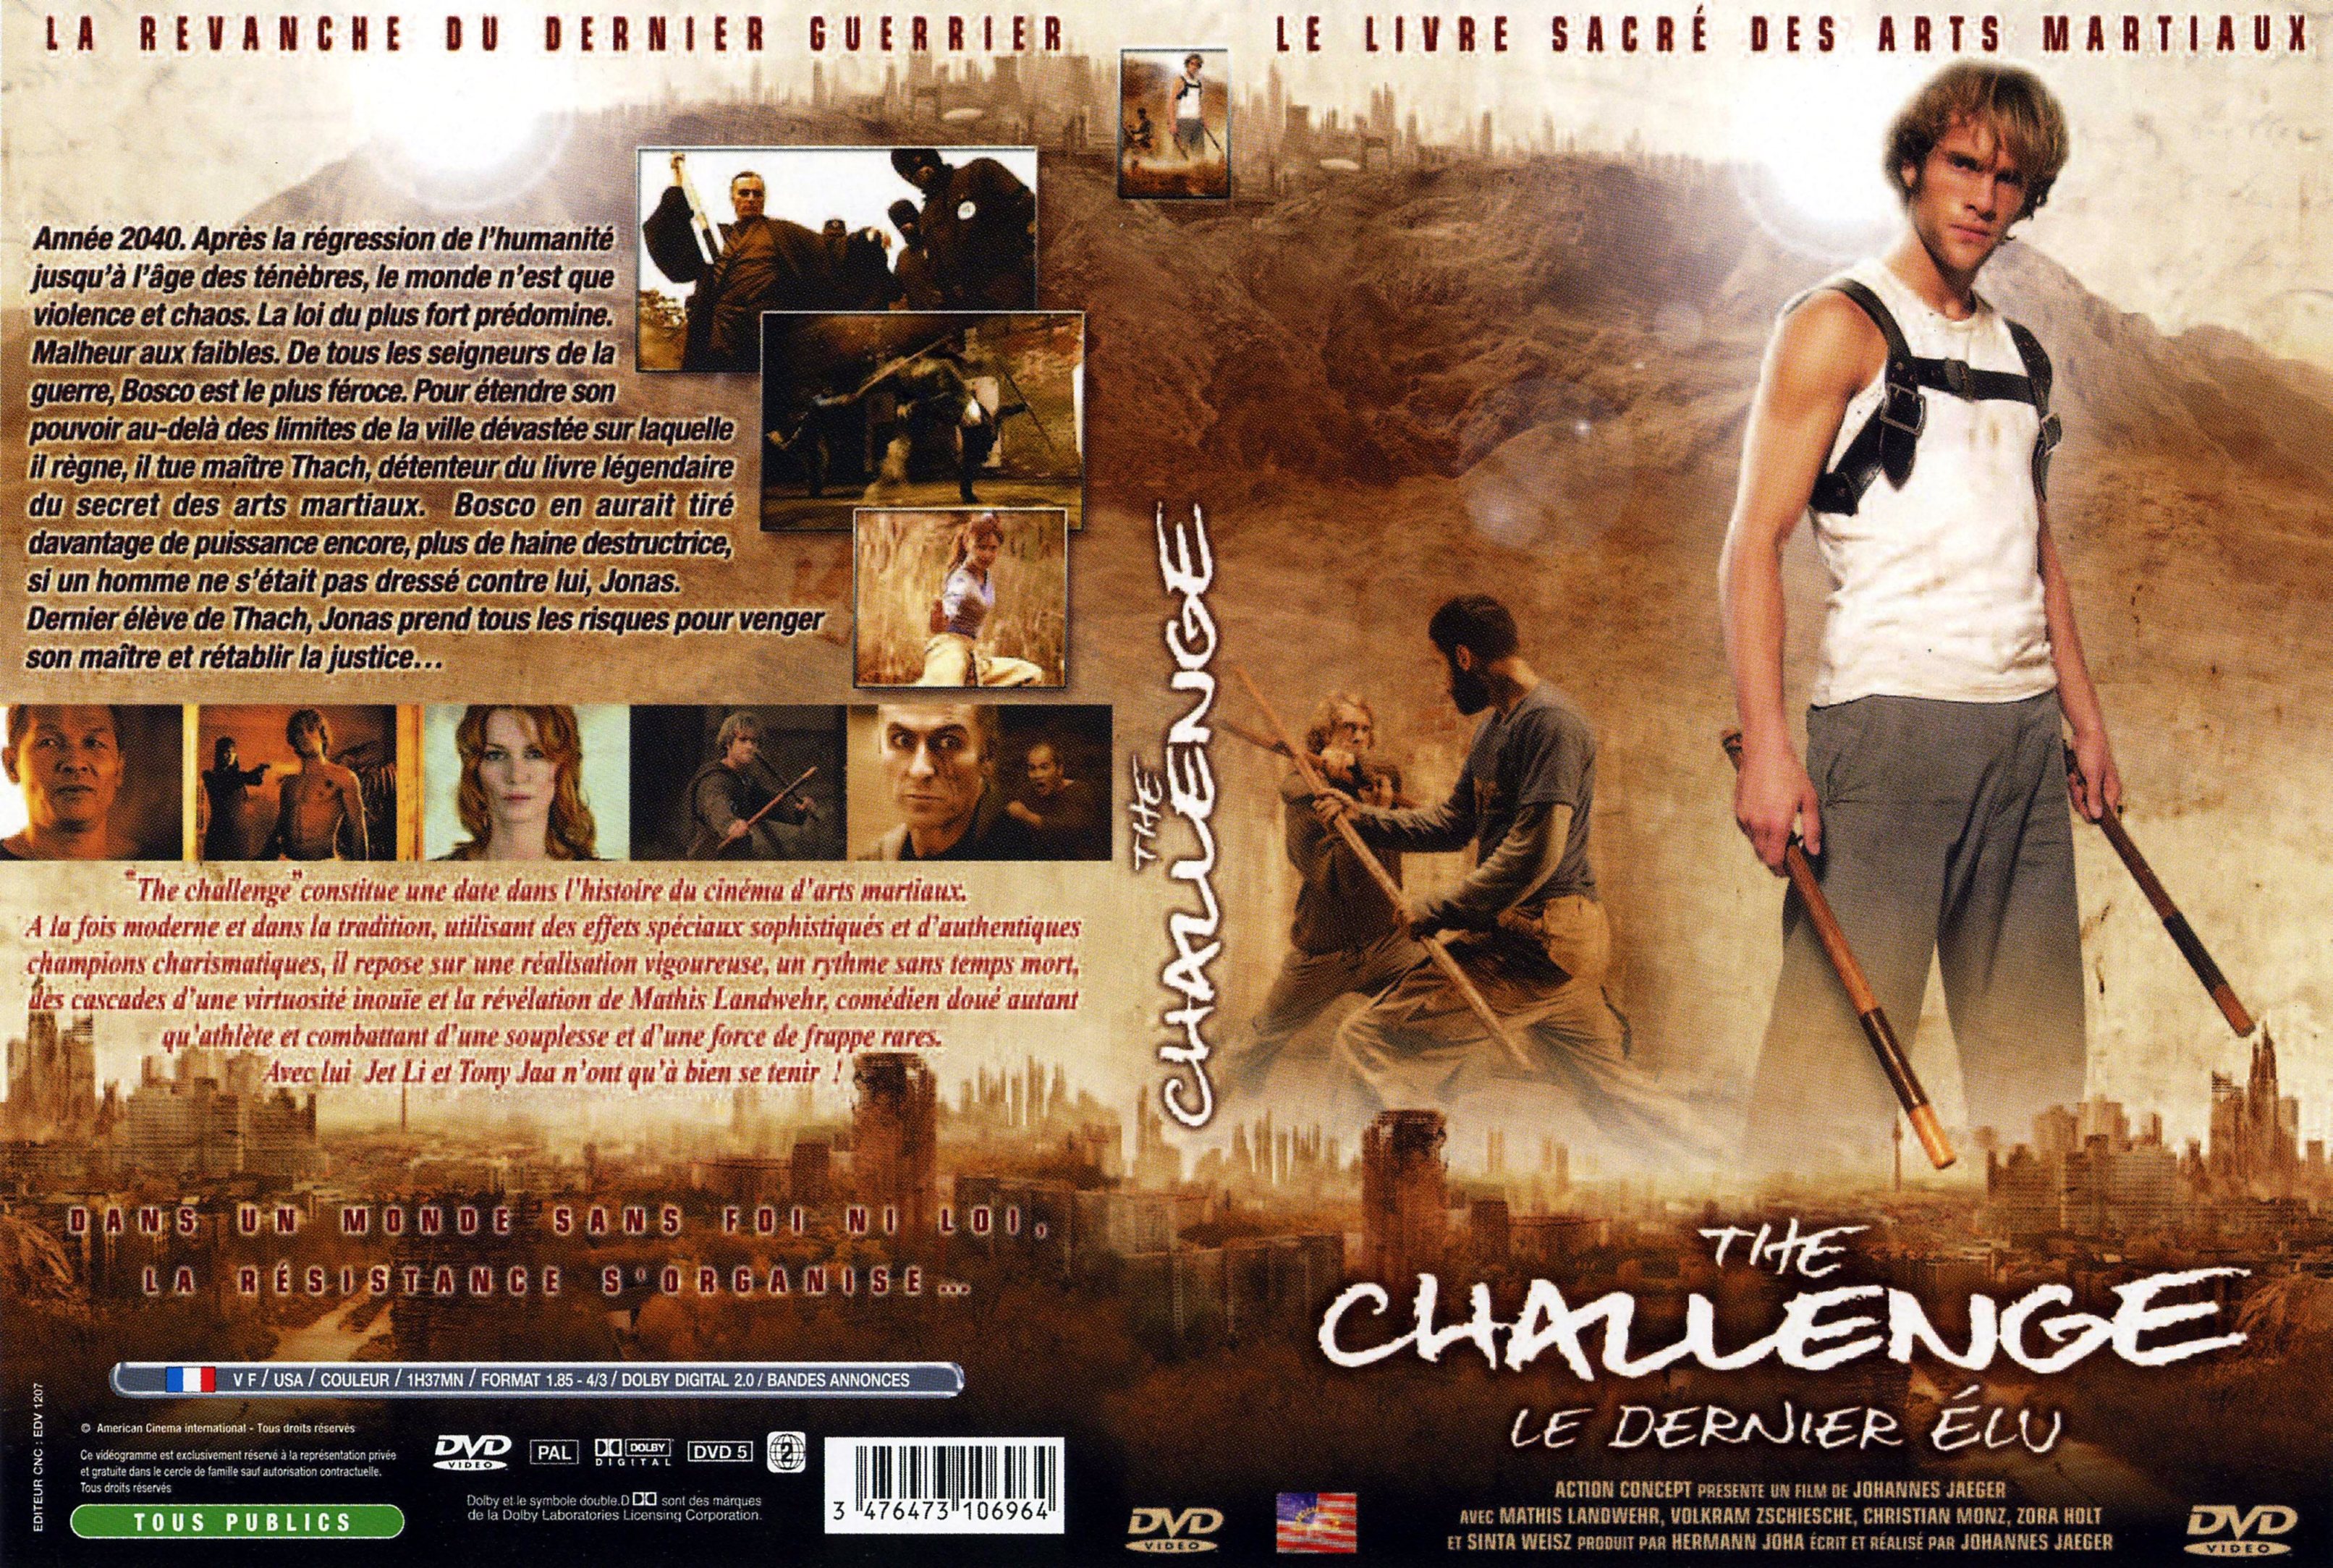 Jaquette DVD The challenge